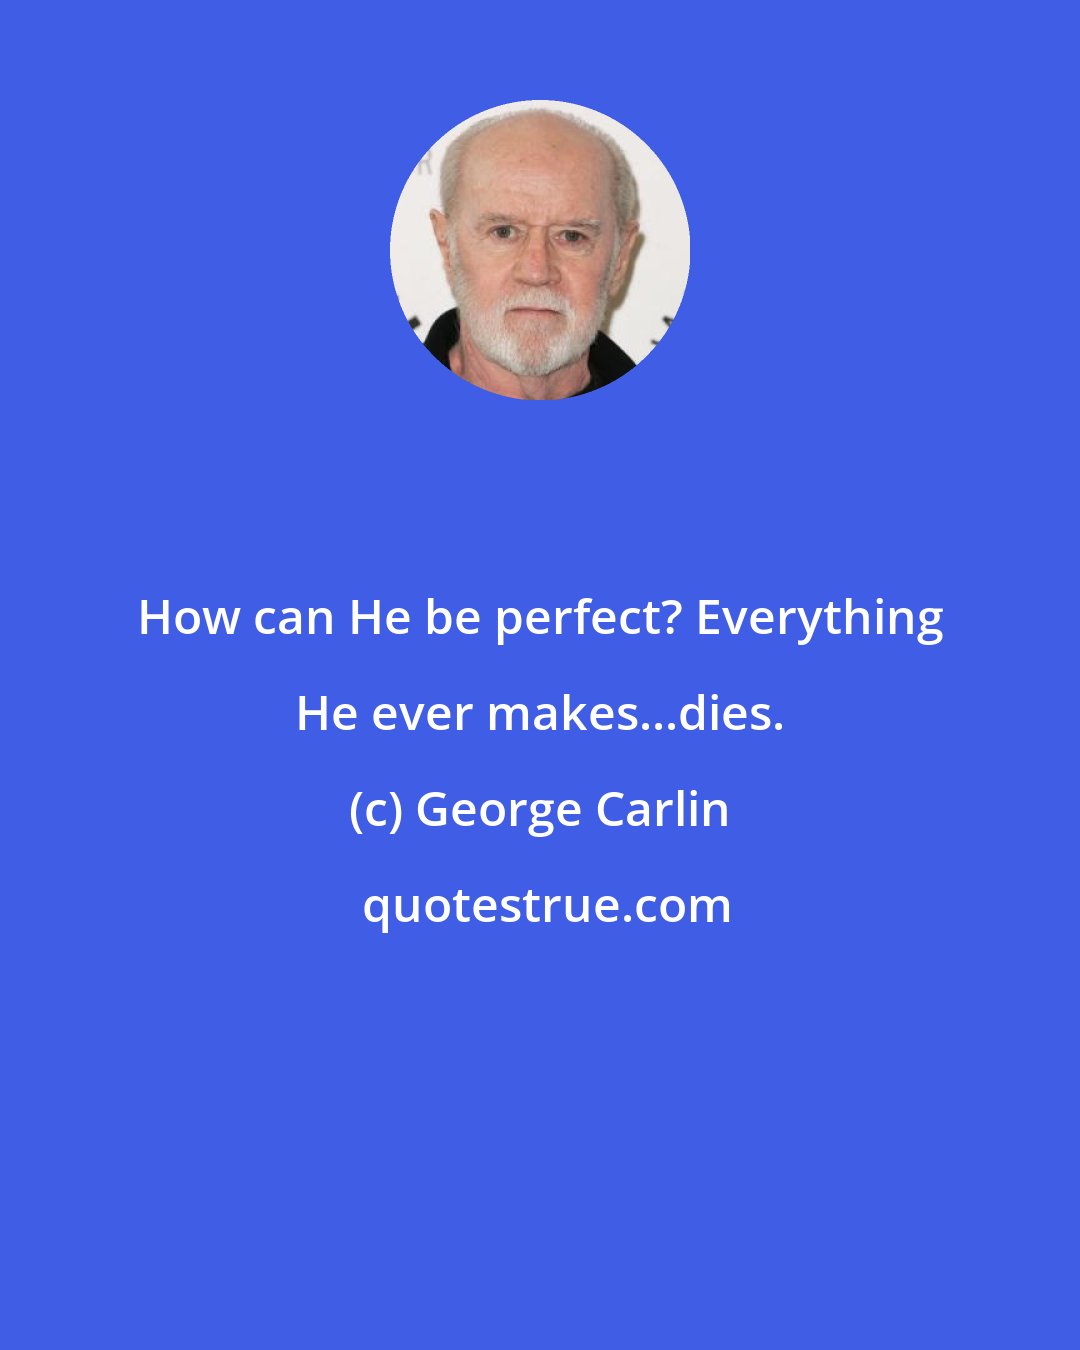 George Carlin: How can He be perfect? Everything He ever makes...dies.